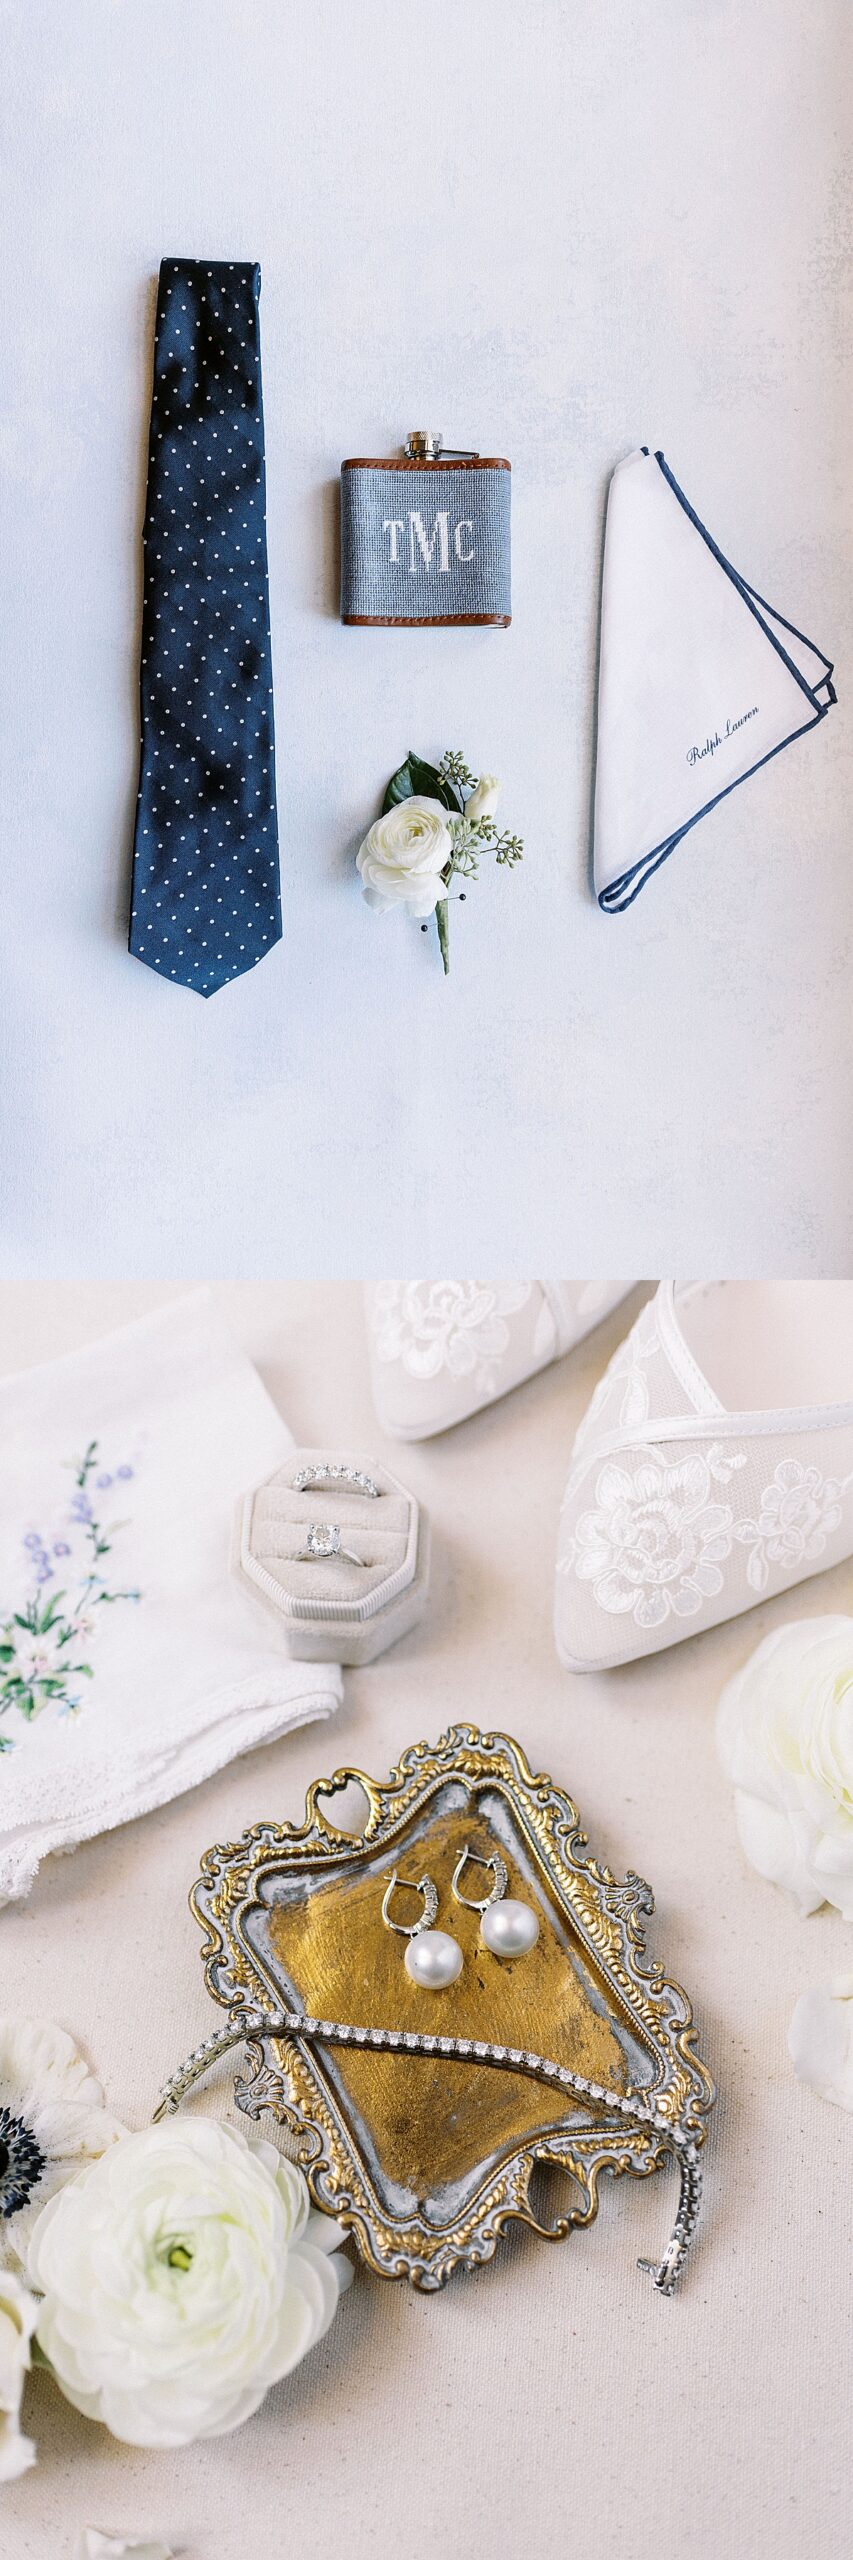 groom and bride wedding details on a flat lay image captured by Boston wedding photographer